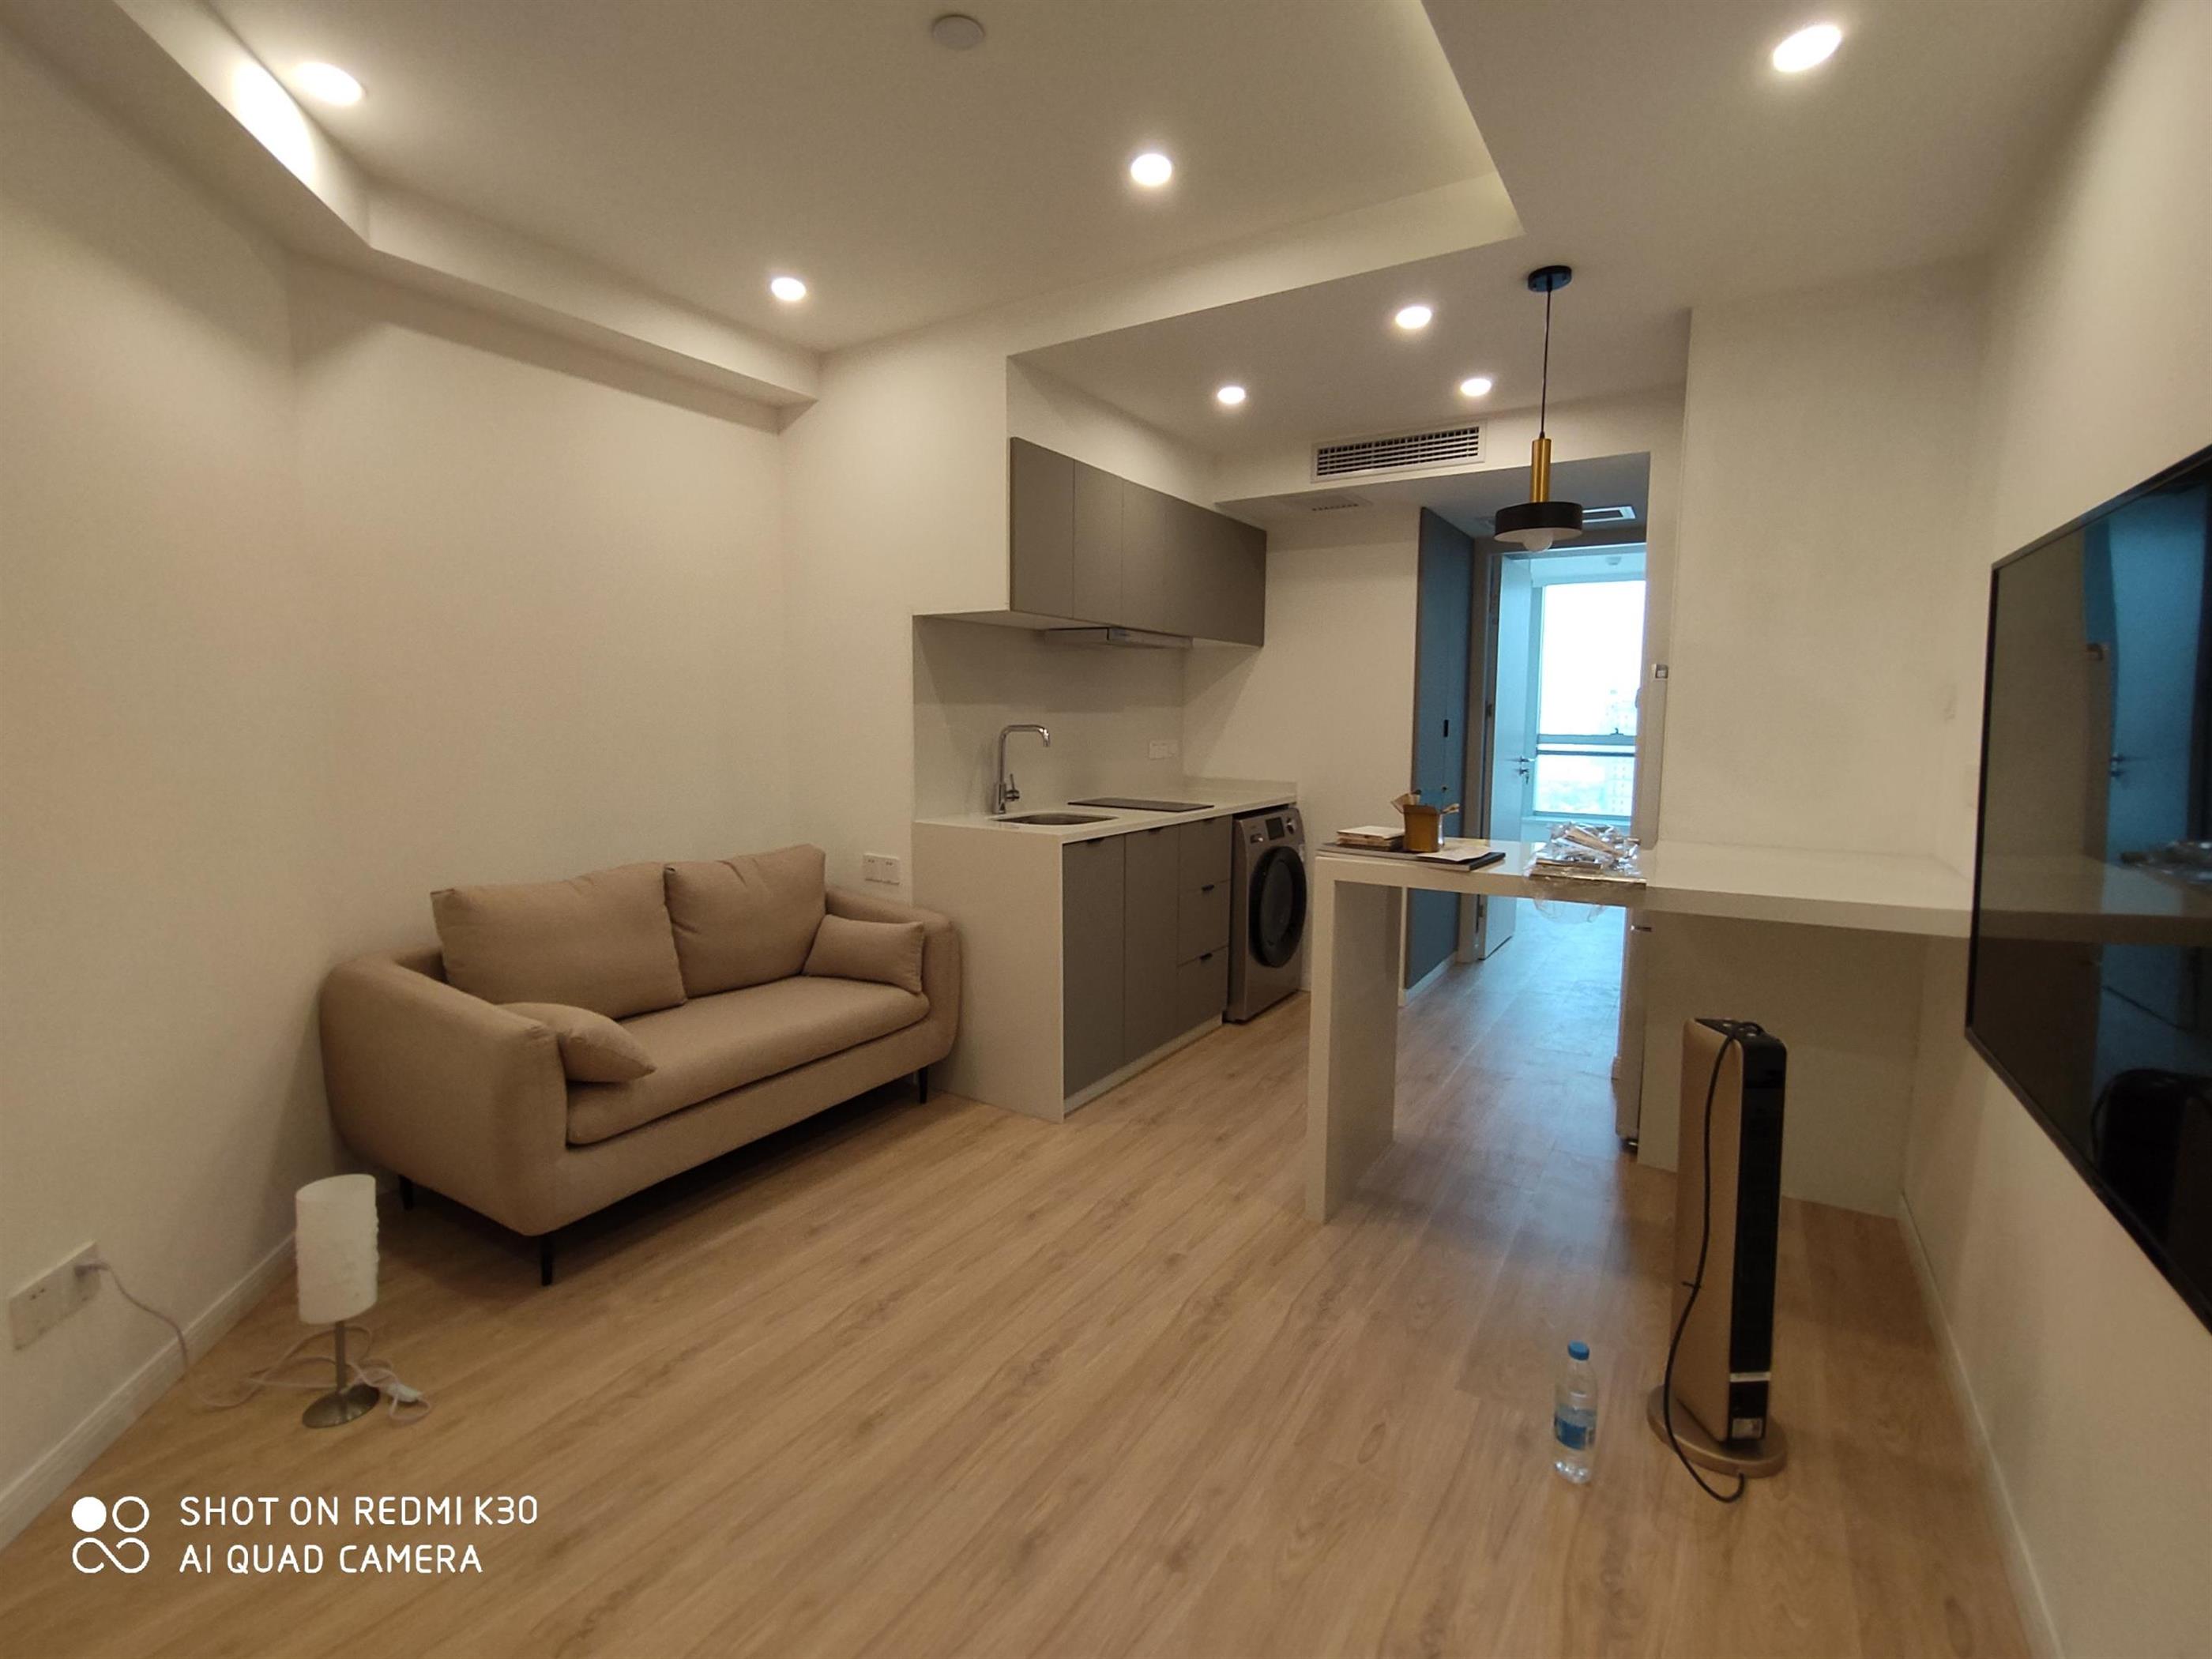 Convenient Short+Long-term 1BR for Rent in Nanjing W Rd Shang